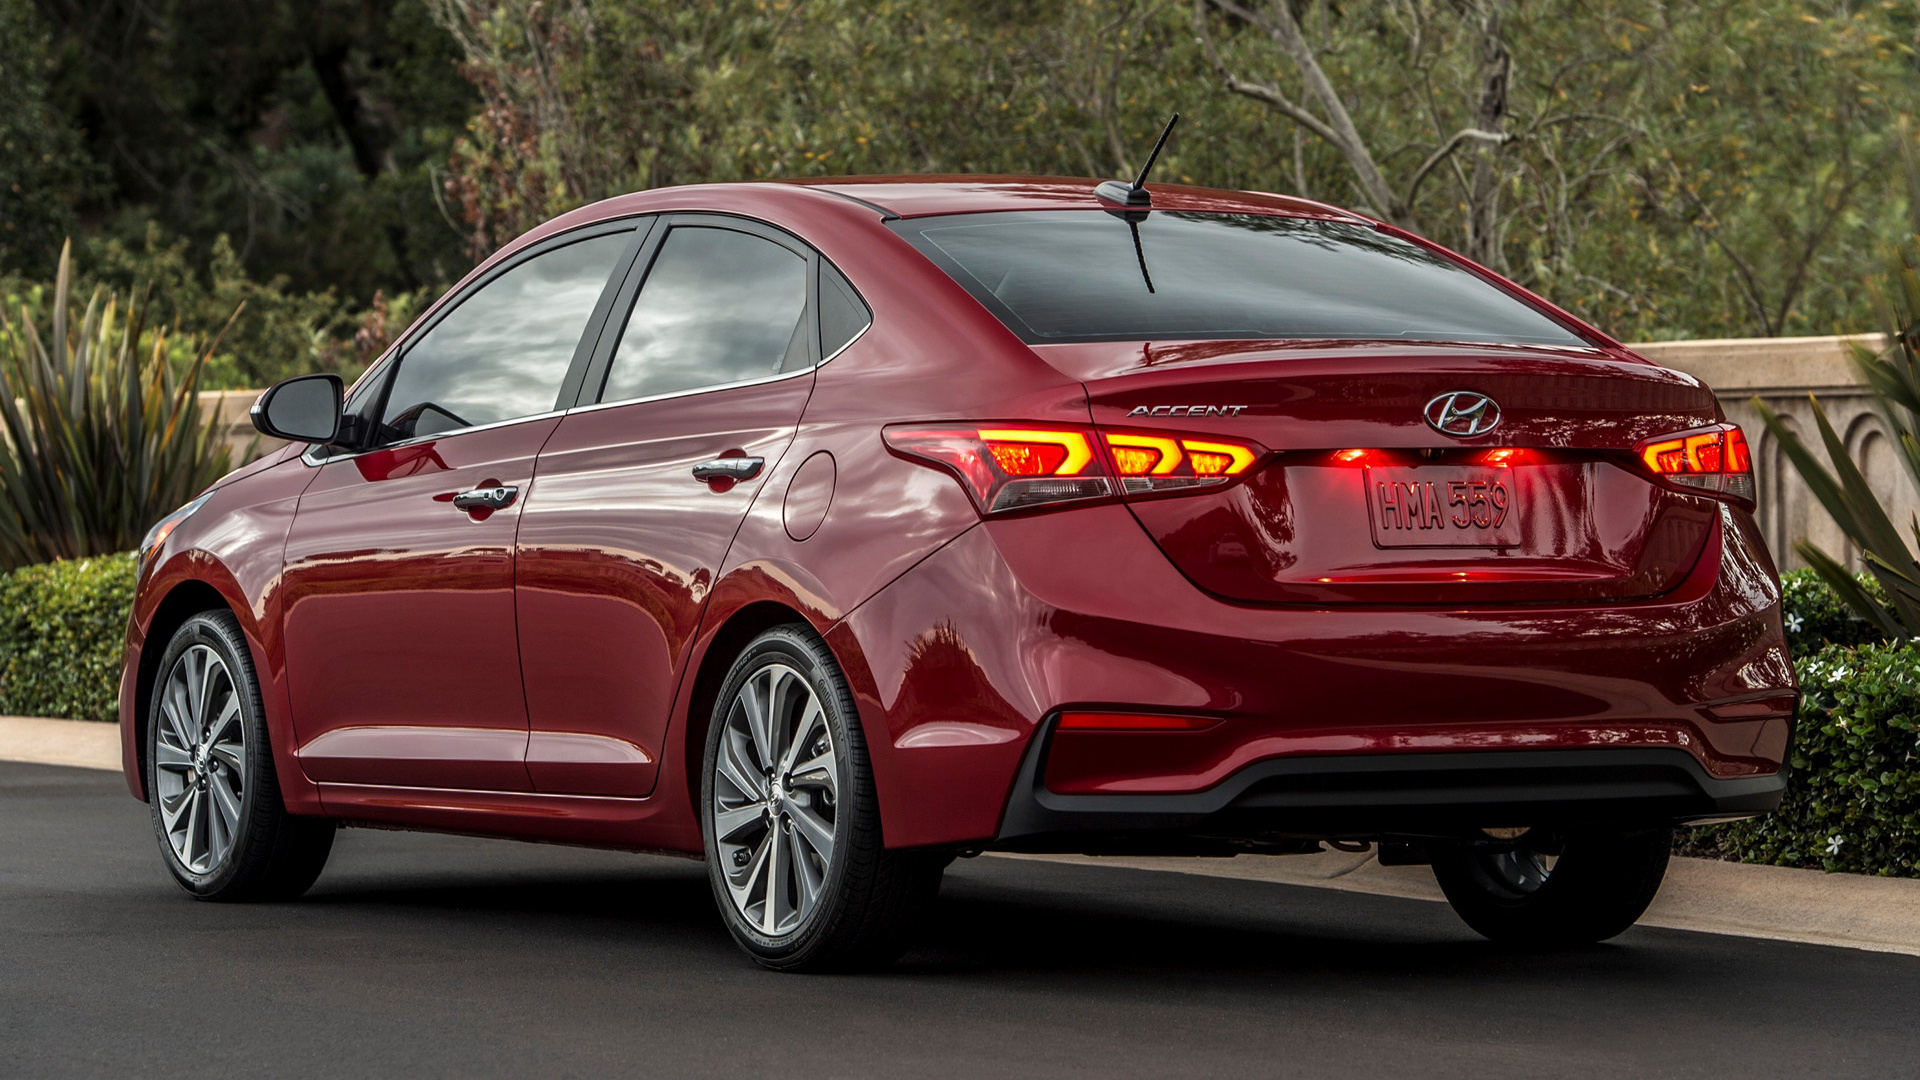 2018 Hyundai Accent (US) - Wallpapers and HD Images | Car Pixel